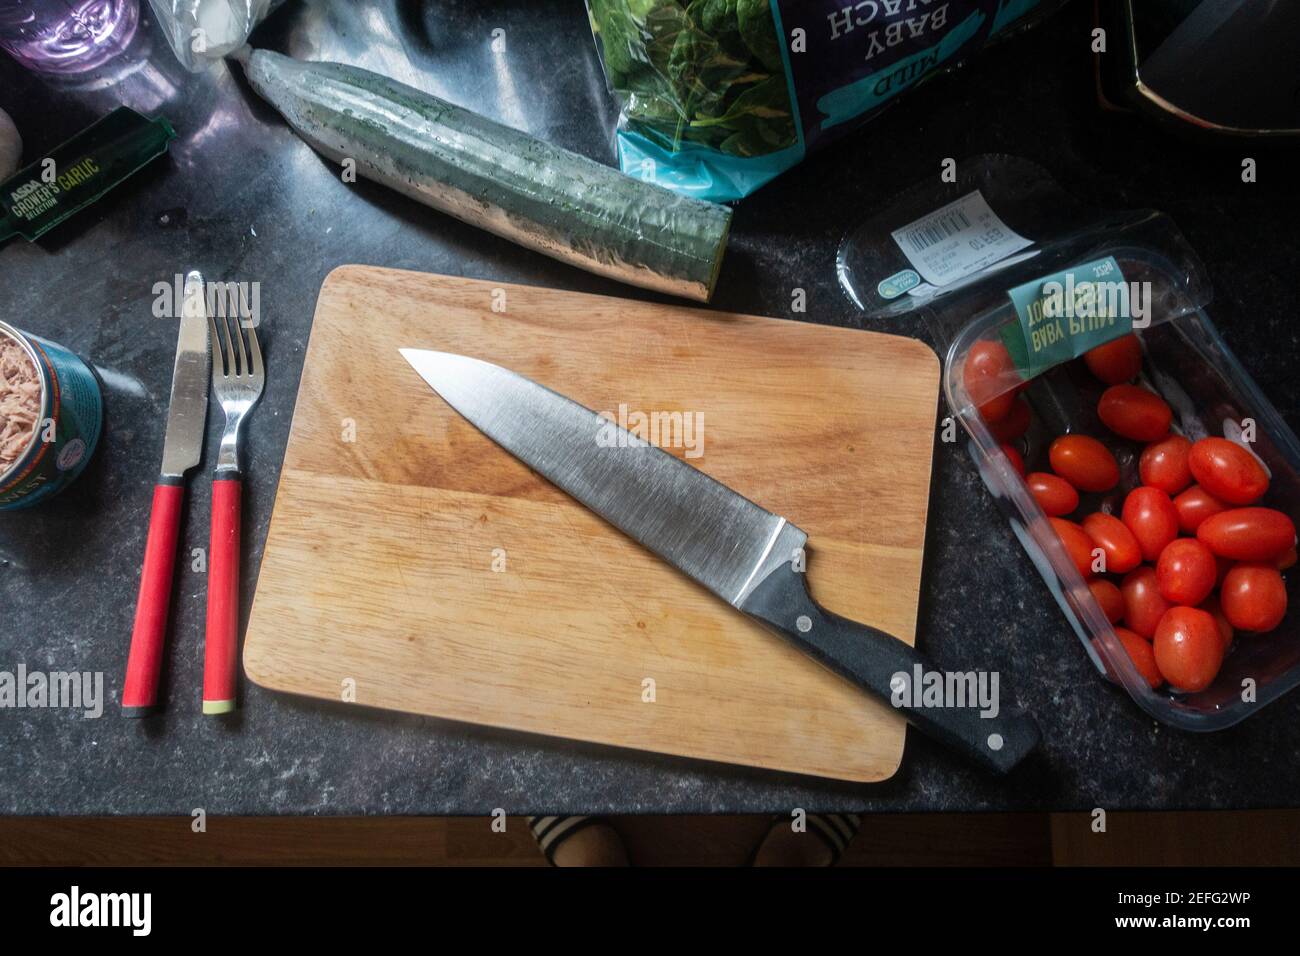 Looking down at a kitchen knife on a wooden chopping board on a kitchen worktop ready to prepare some food. Stock Photo